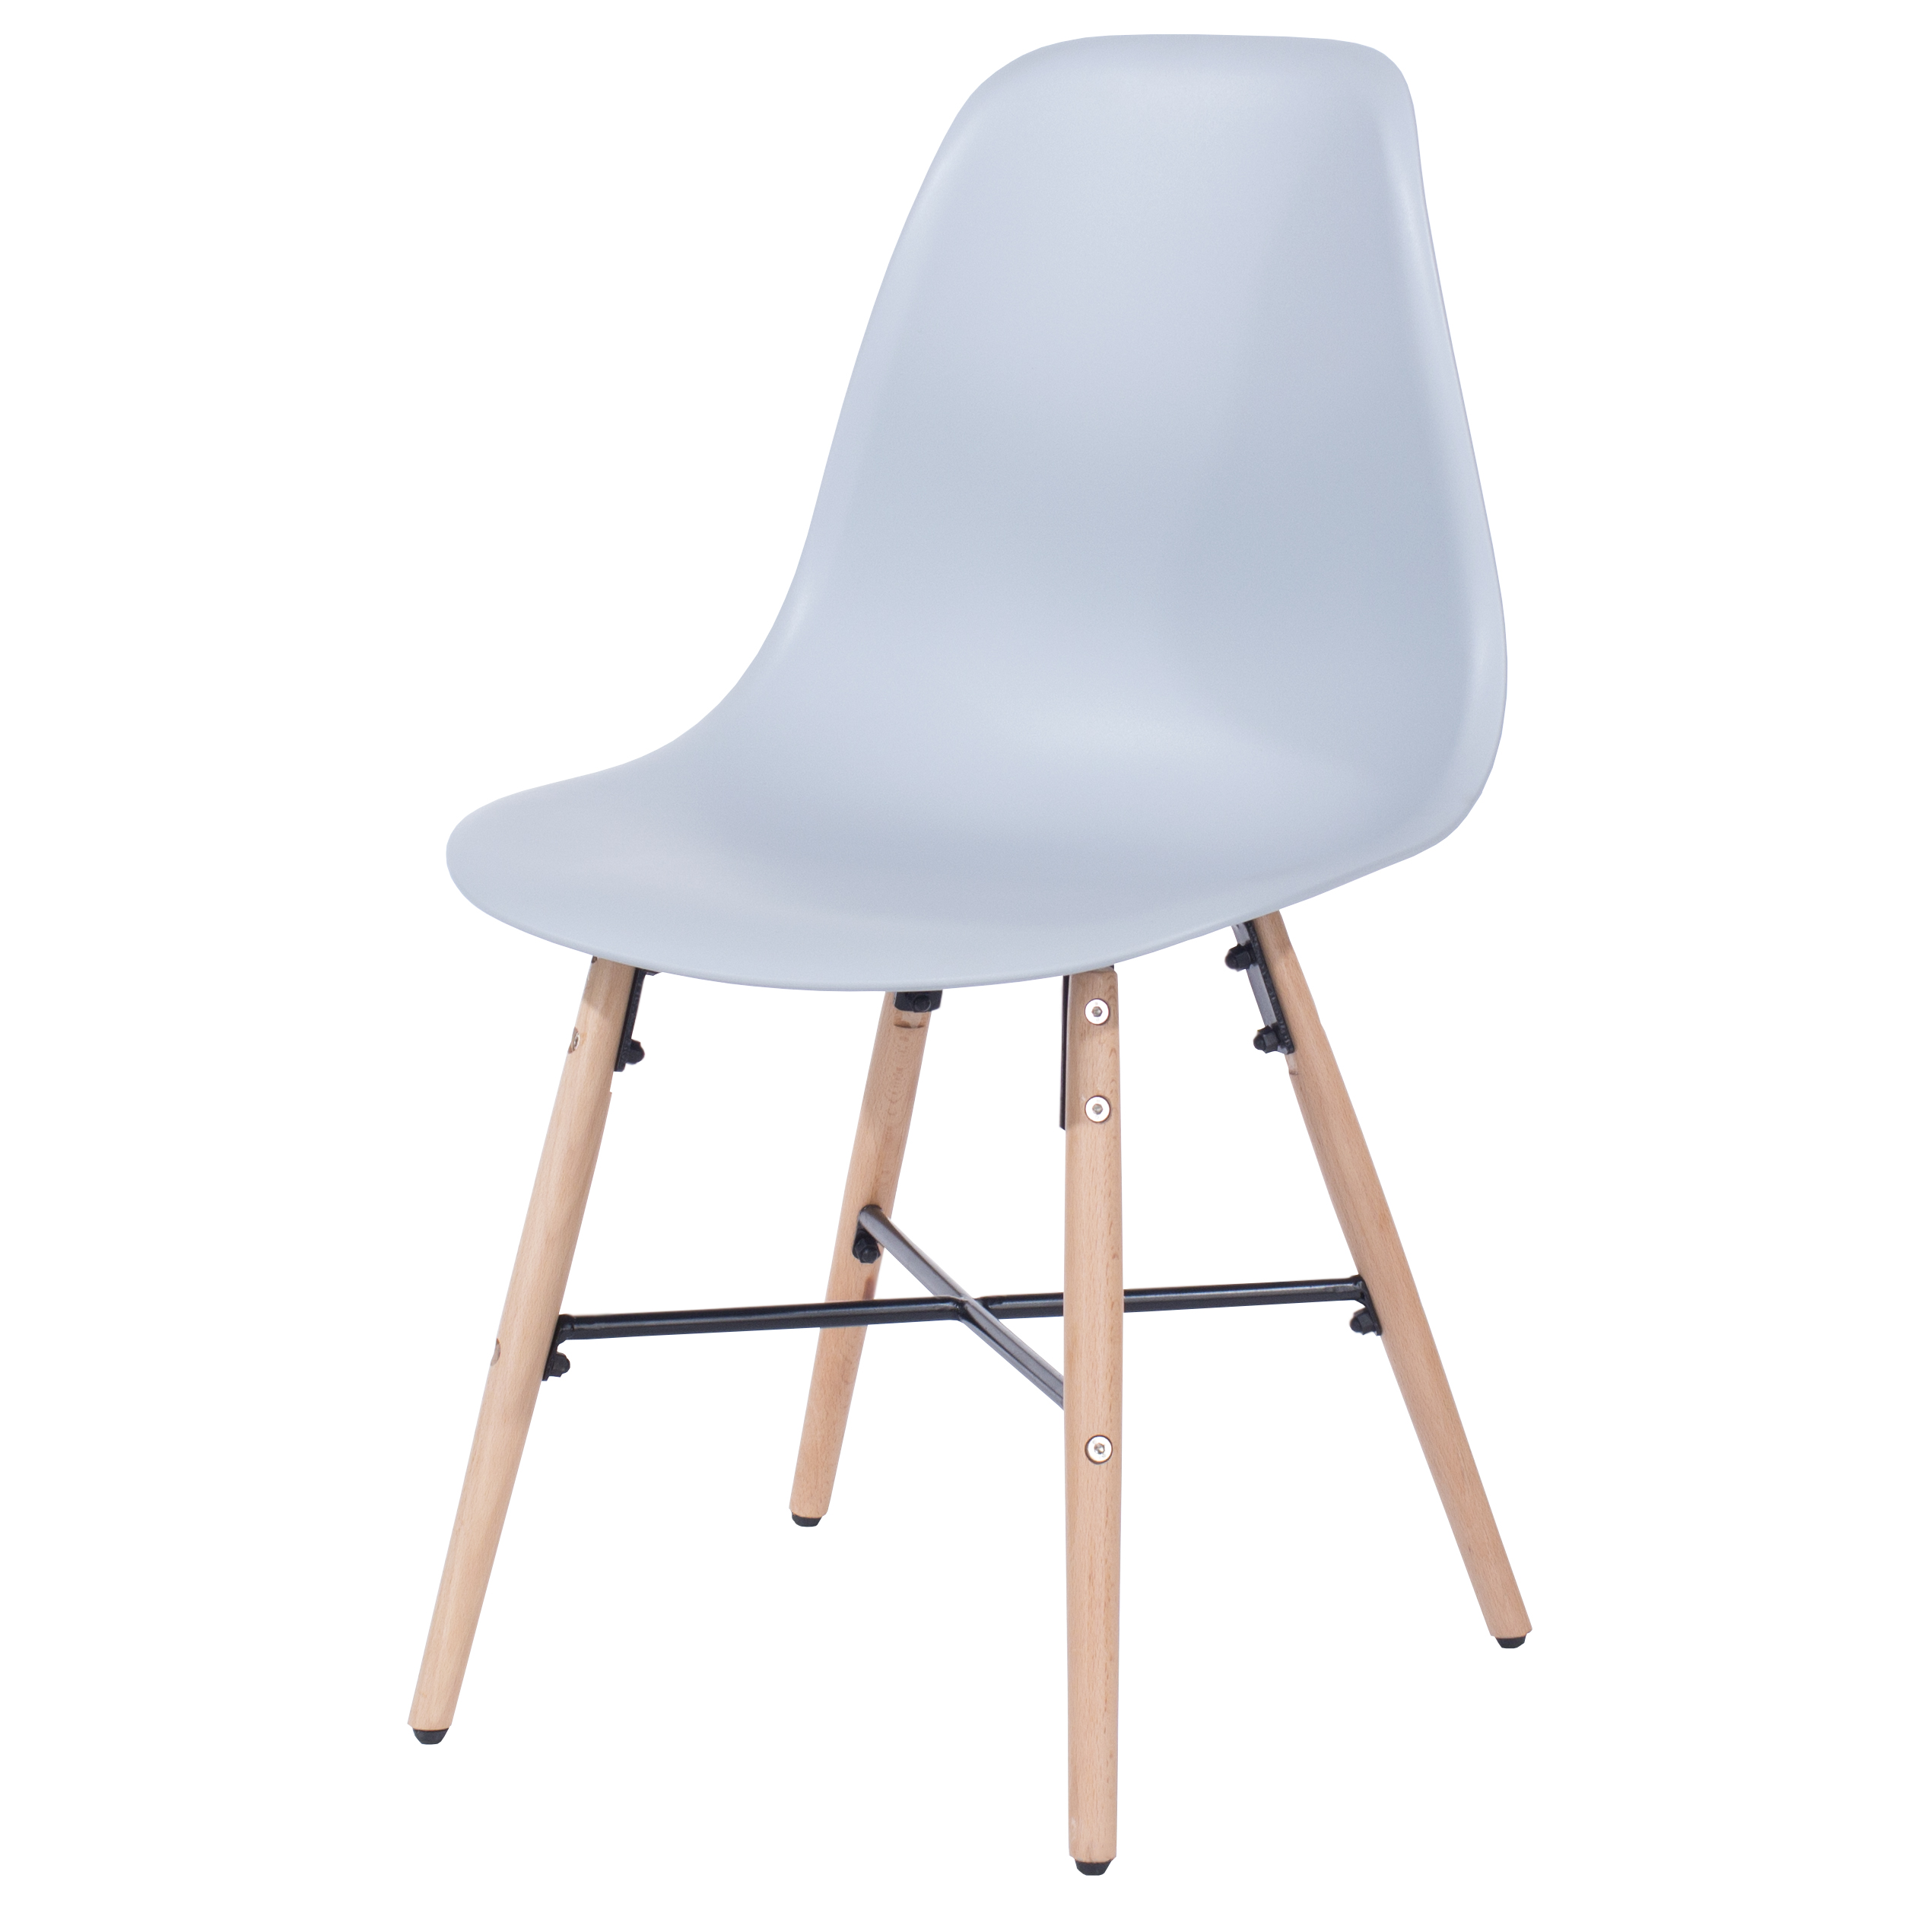 Penny grey plastic chairs with wood legs & metal cross rails (pair)